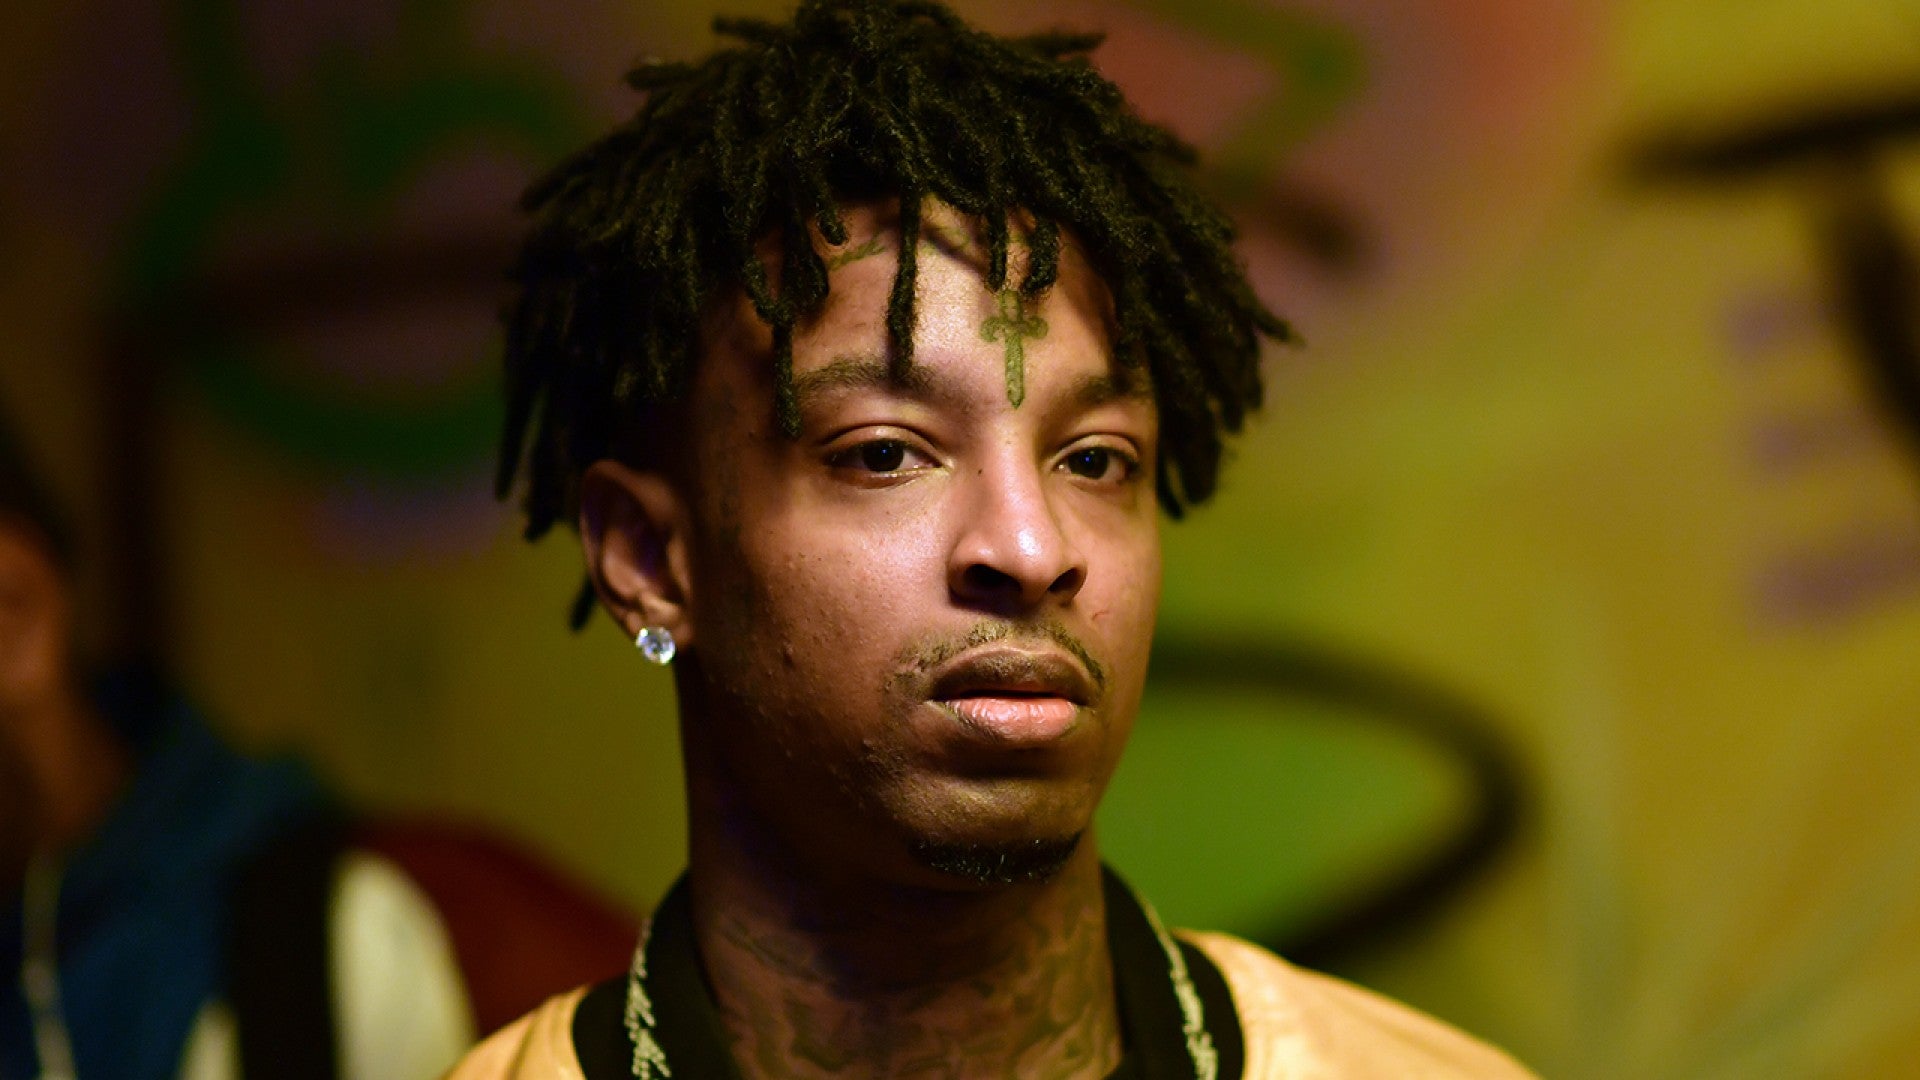 21 Savage is going back home to London 🇬🇧